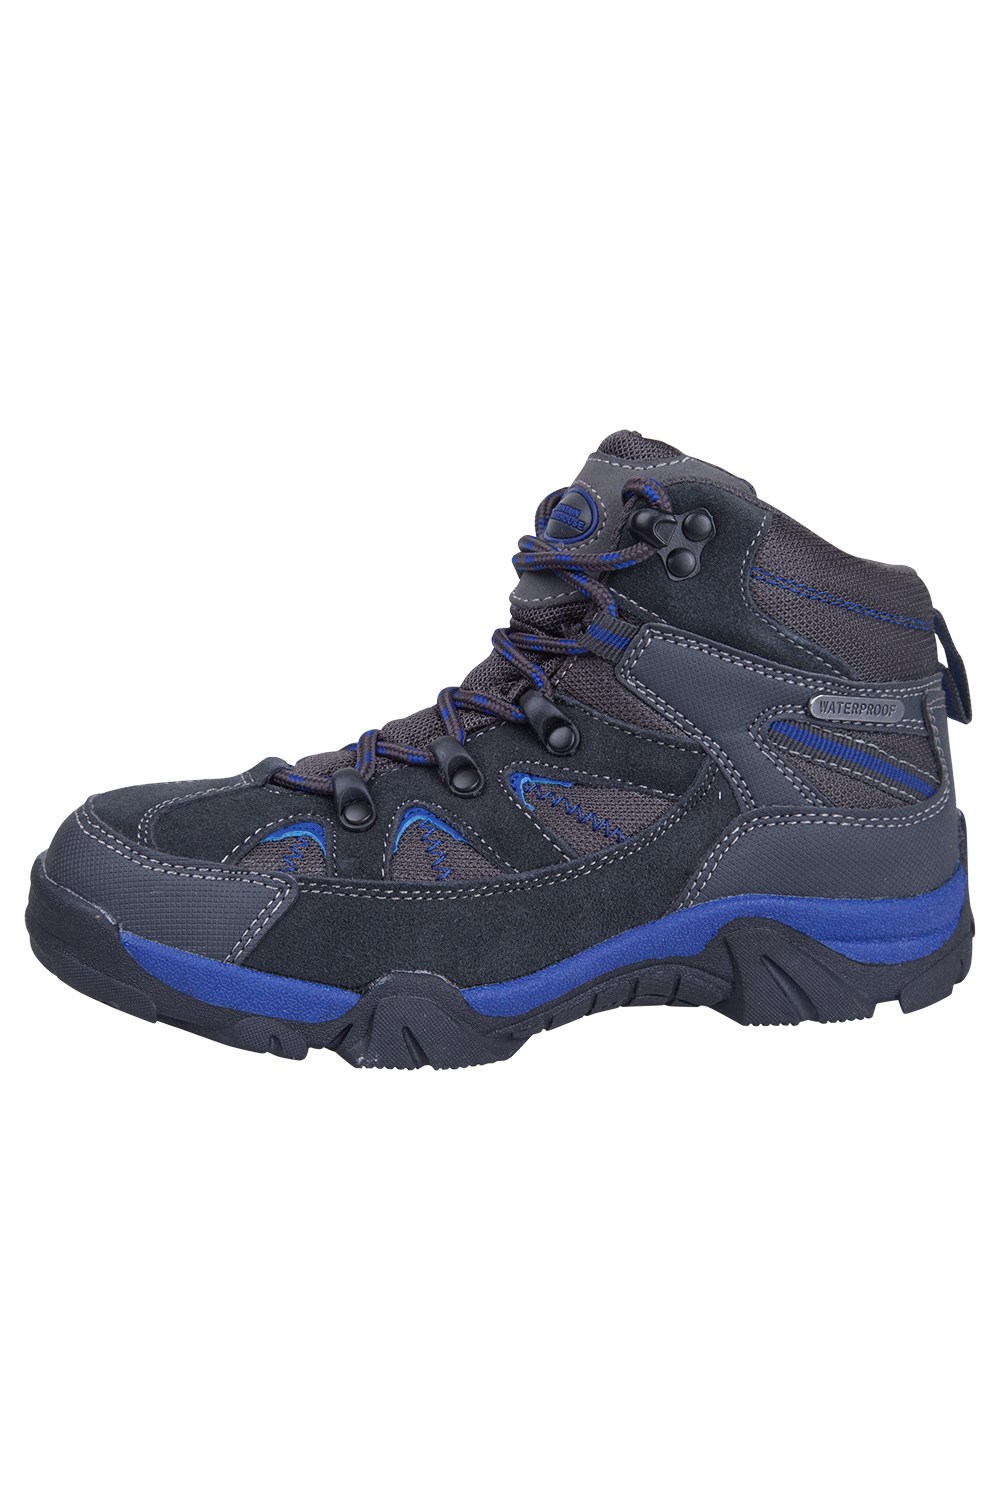 mountain warehouse childrens walking boots